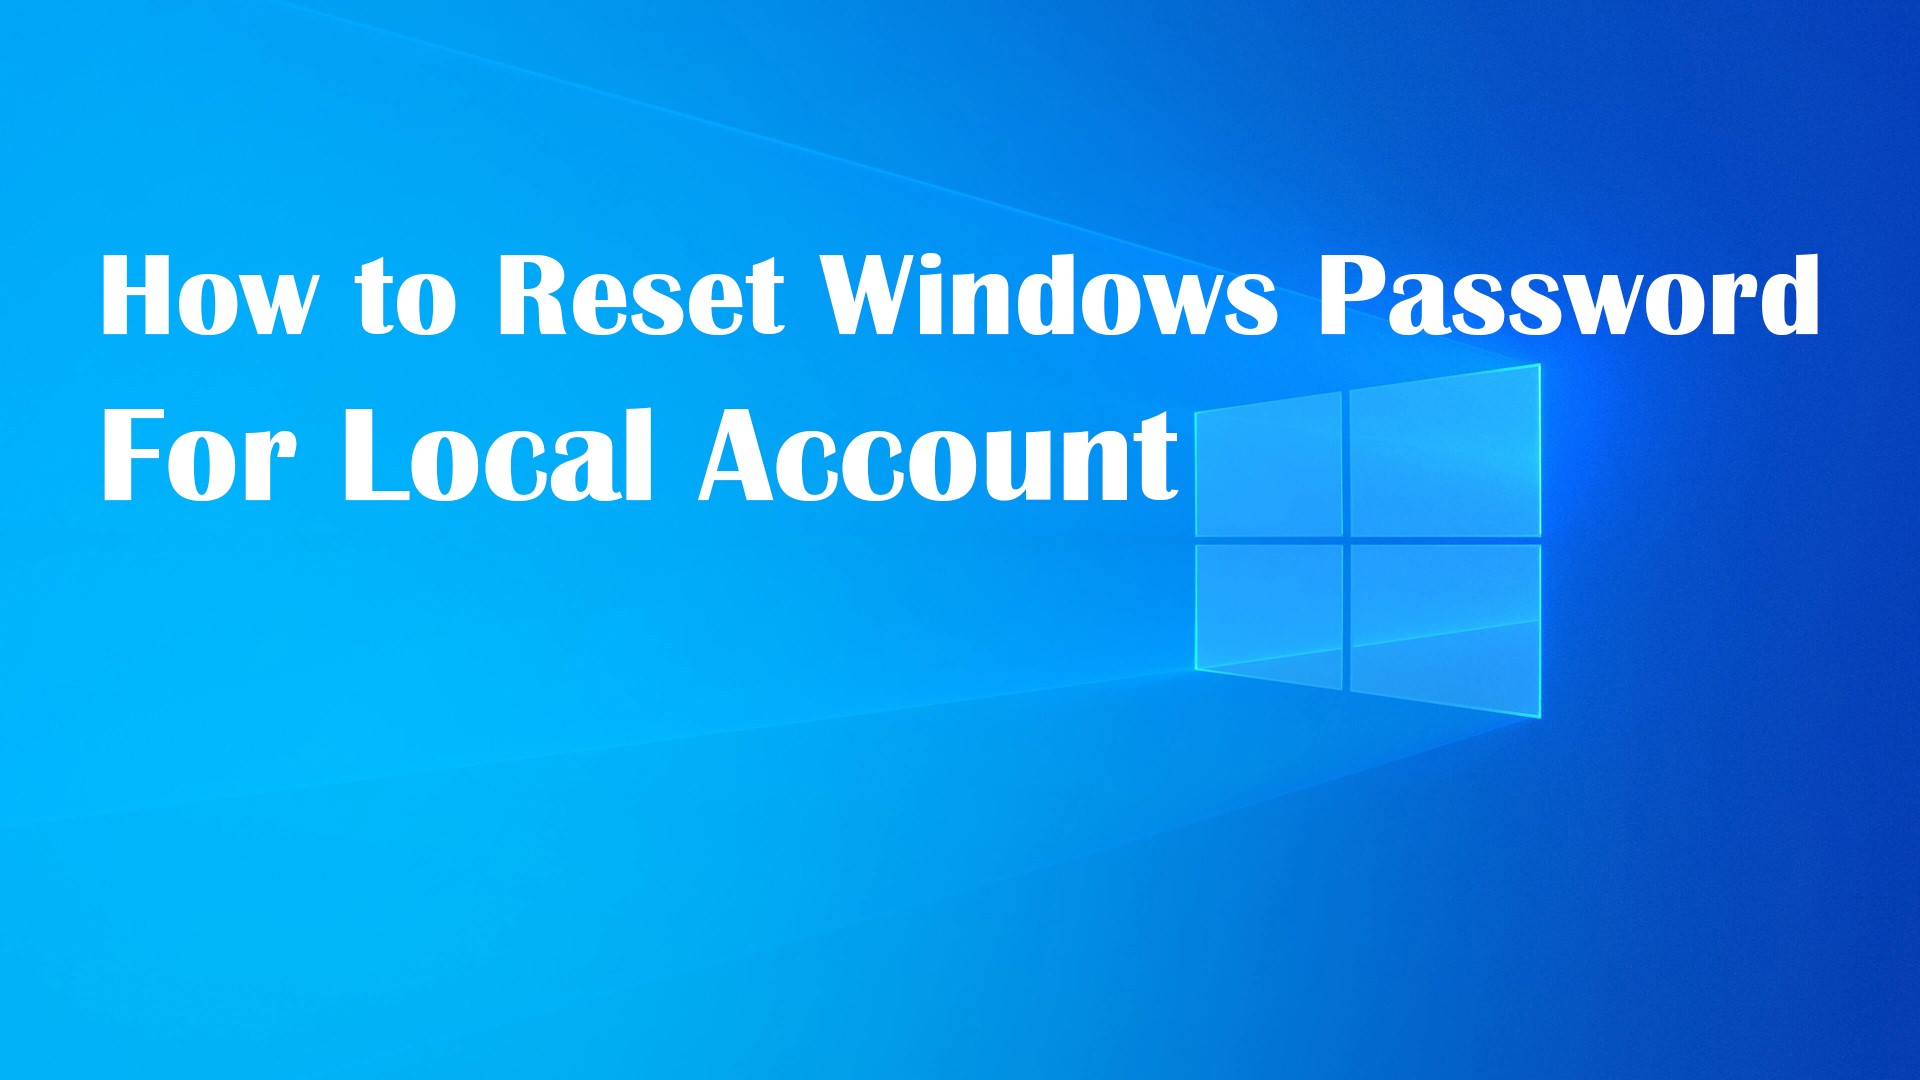 How to Reset Windows Password for Local Account?